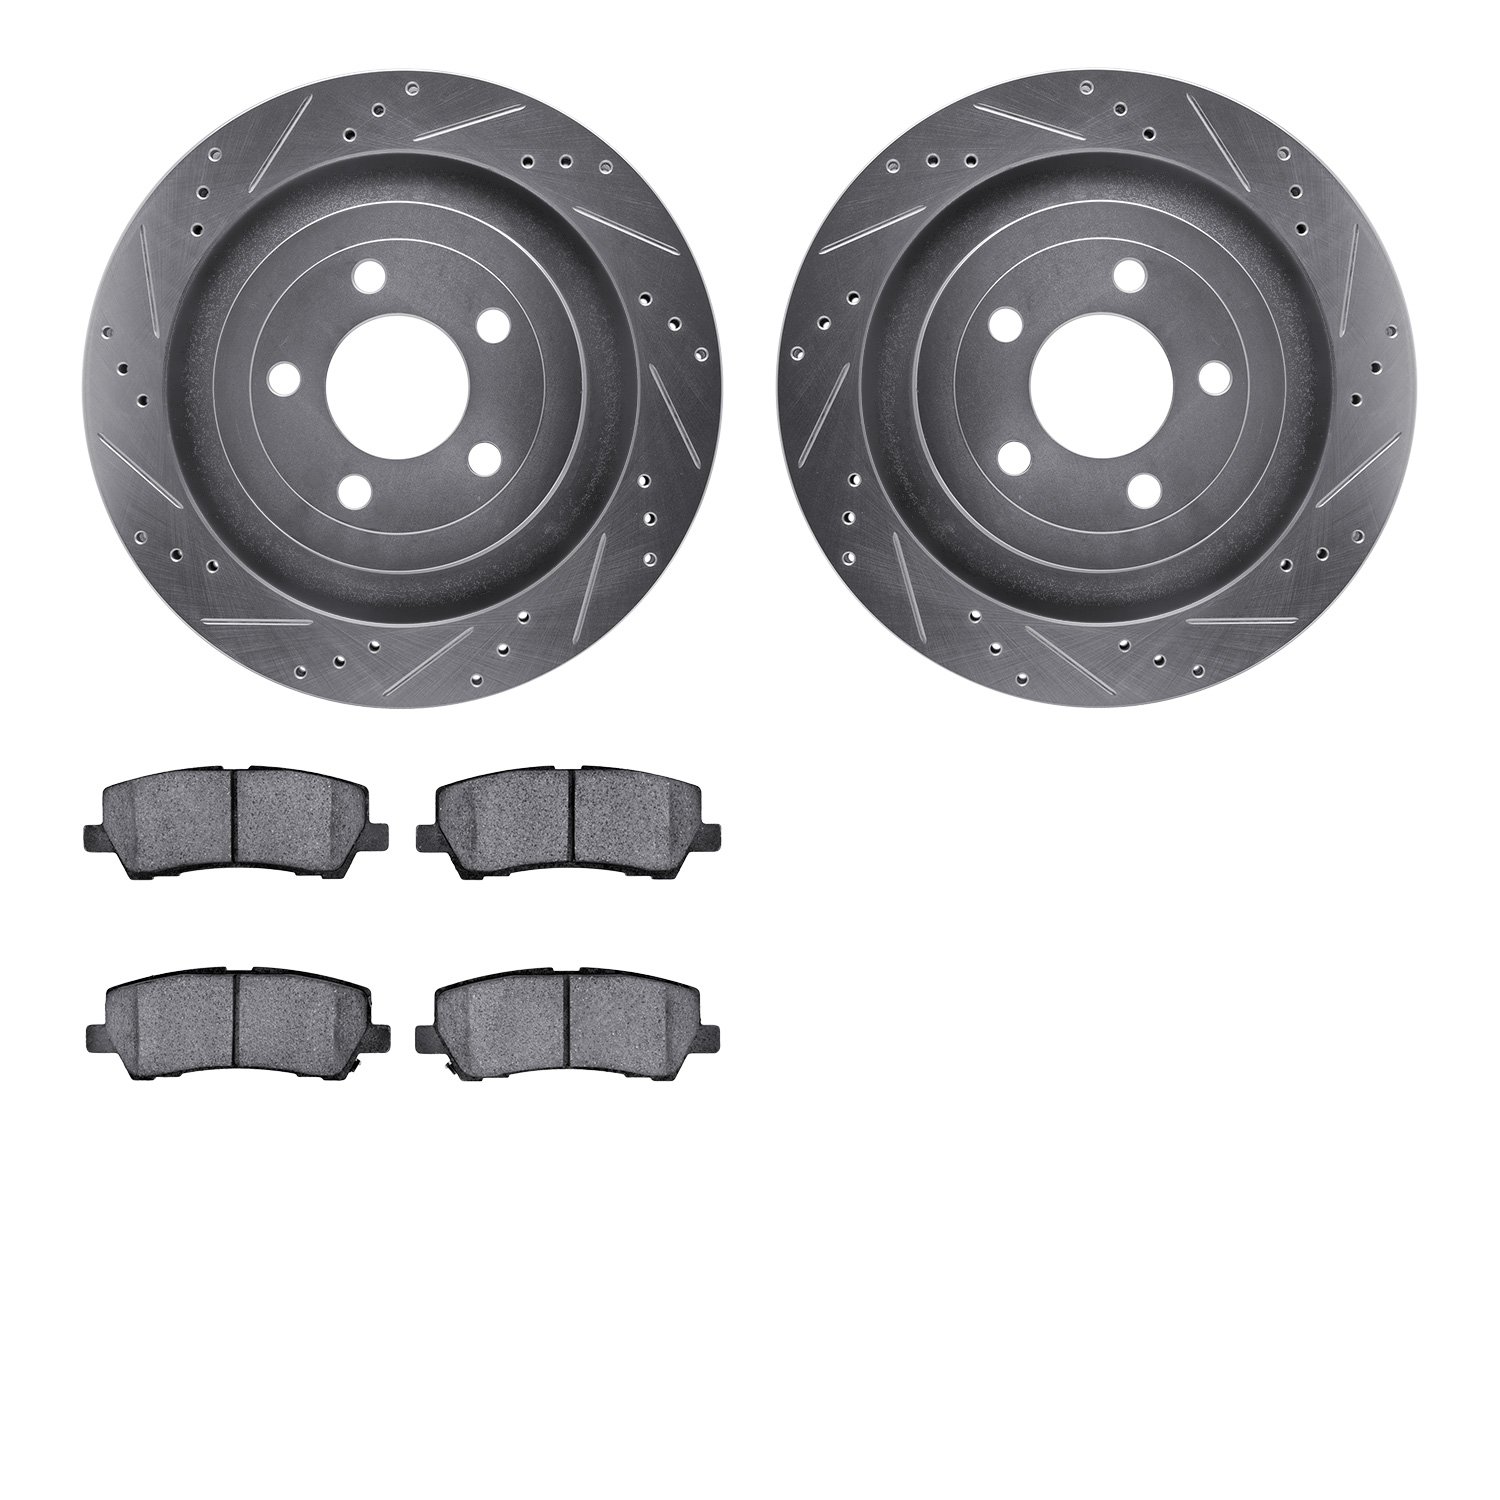 7502-99140 Drilled/Slotted Brake Rotors w/5000 Advanced Brake Pads Kit [Silver], Fits Select Ford/Lincoln/Mercury/Mazda, Positio